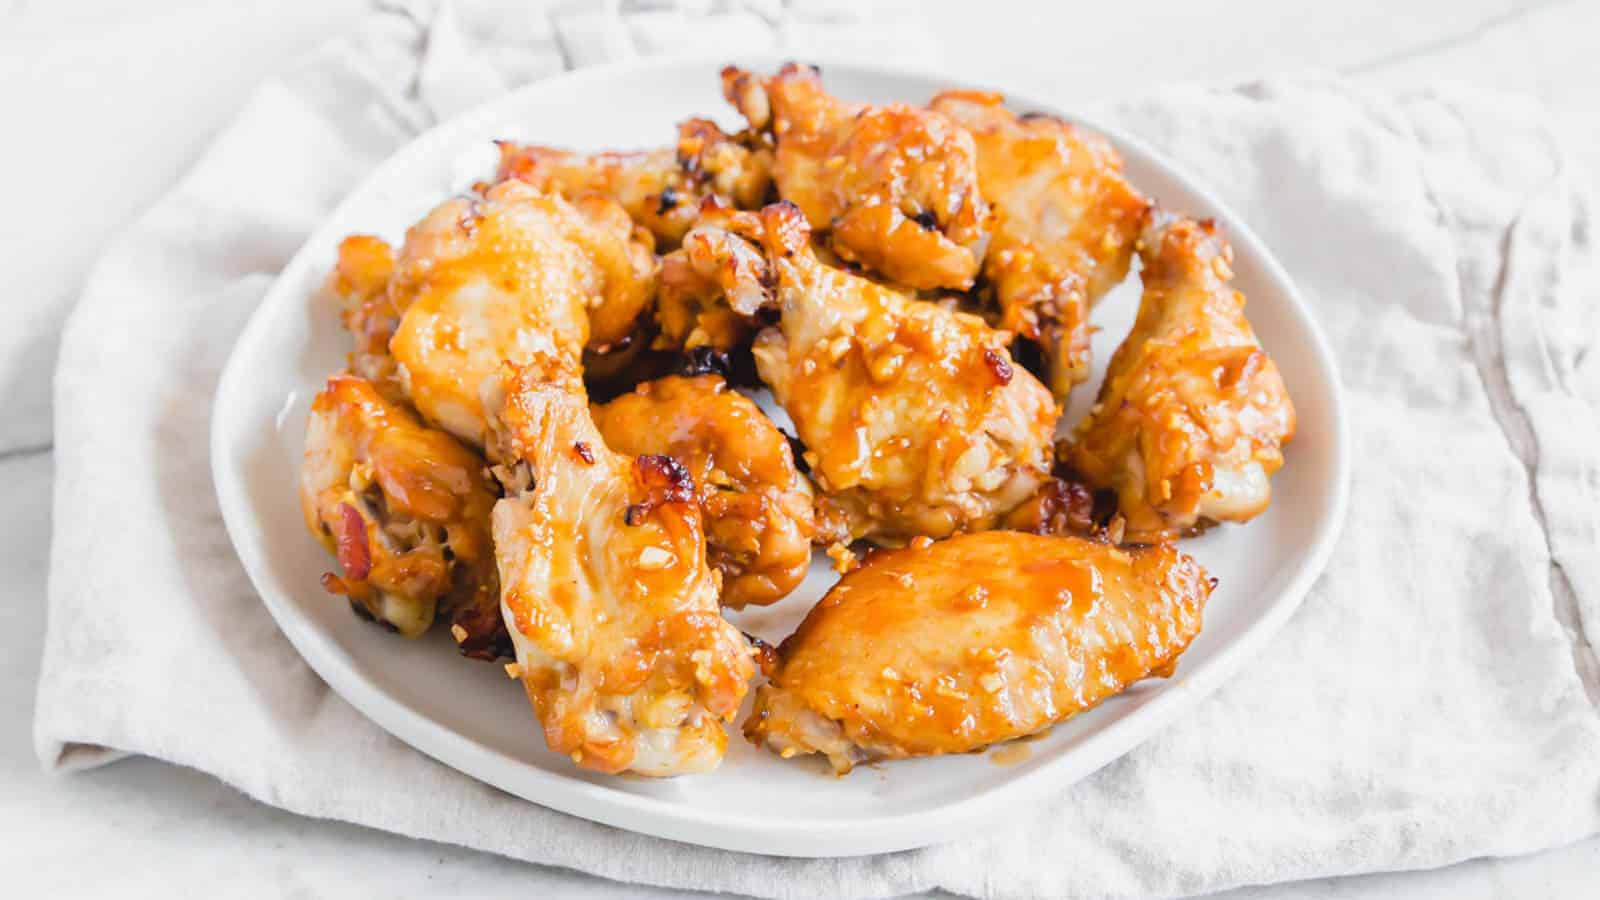 Crispy oven baked marinated chicken wings on a plate.